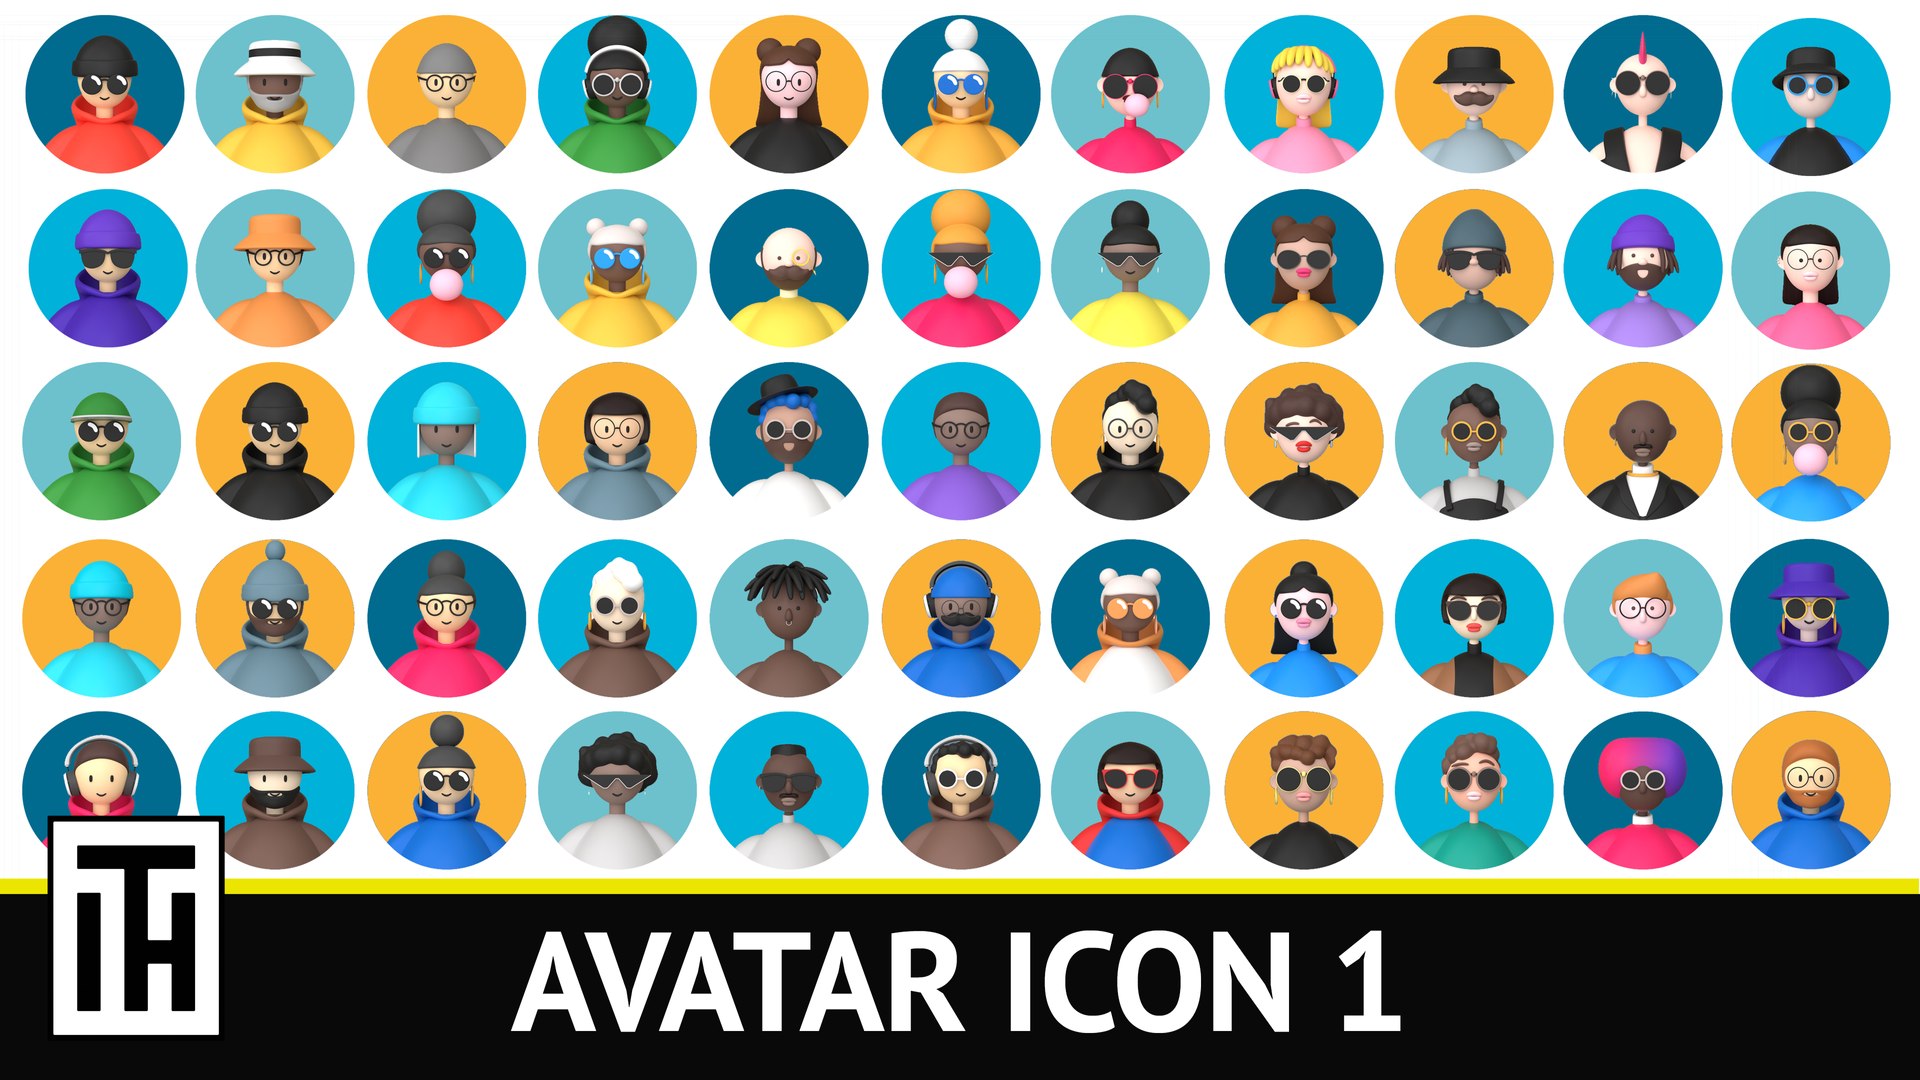 1,105,713 Avatar Icon Images, Stock Photos, 3D objects, & Vectors